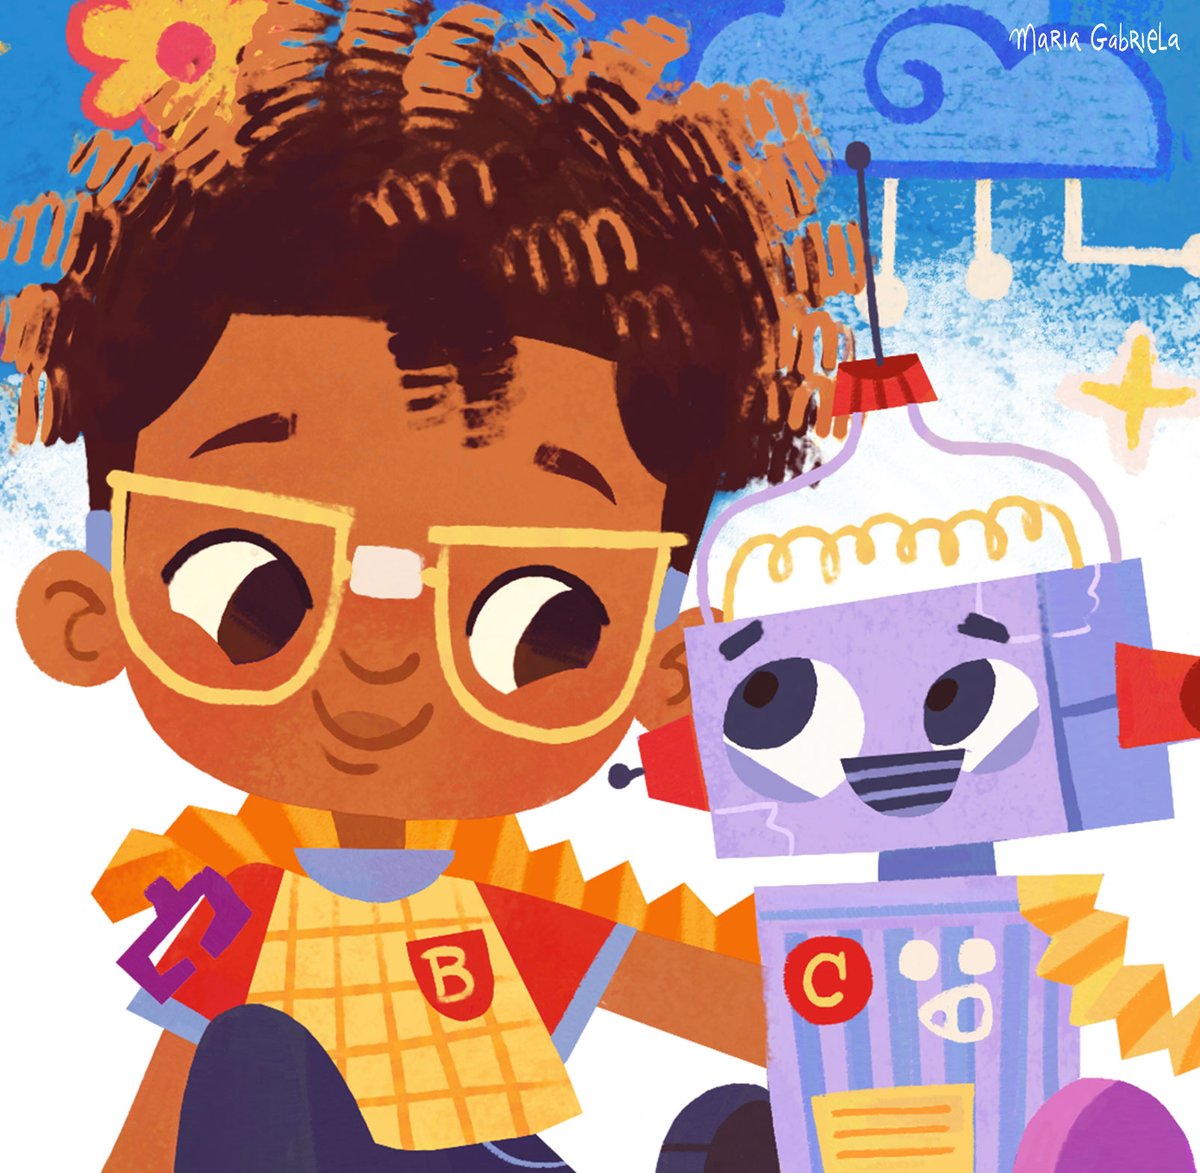 🌈🤖 Cover Reveal and Indiegogo Campaign! 🤖🌈 This is a new book I've been working on called 'Brainy Billy Builds a Bot', written by Charlotte Jones @KidsBooksJunkie and illustrated by me! You can support the project and guarantee your copy at brainybilly.com